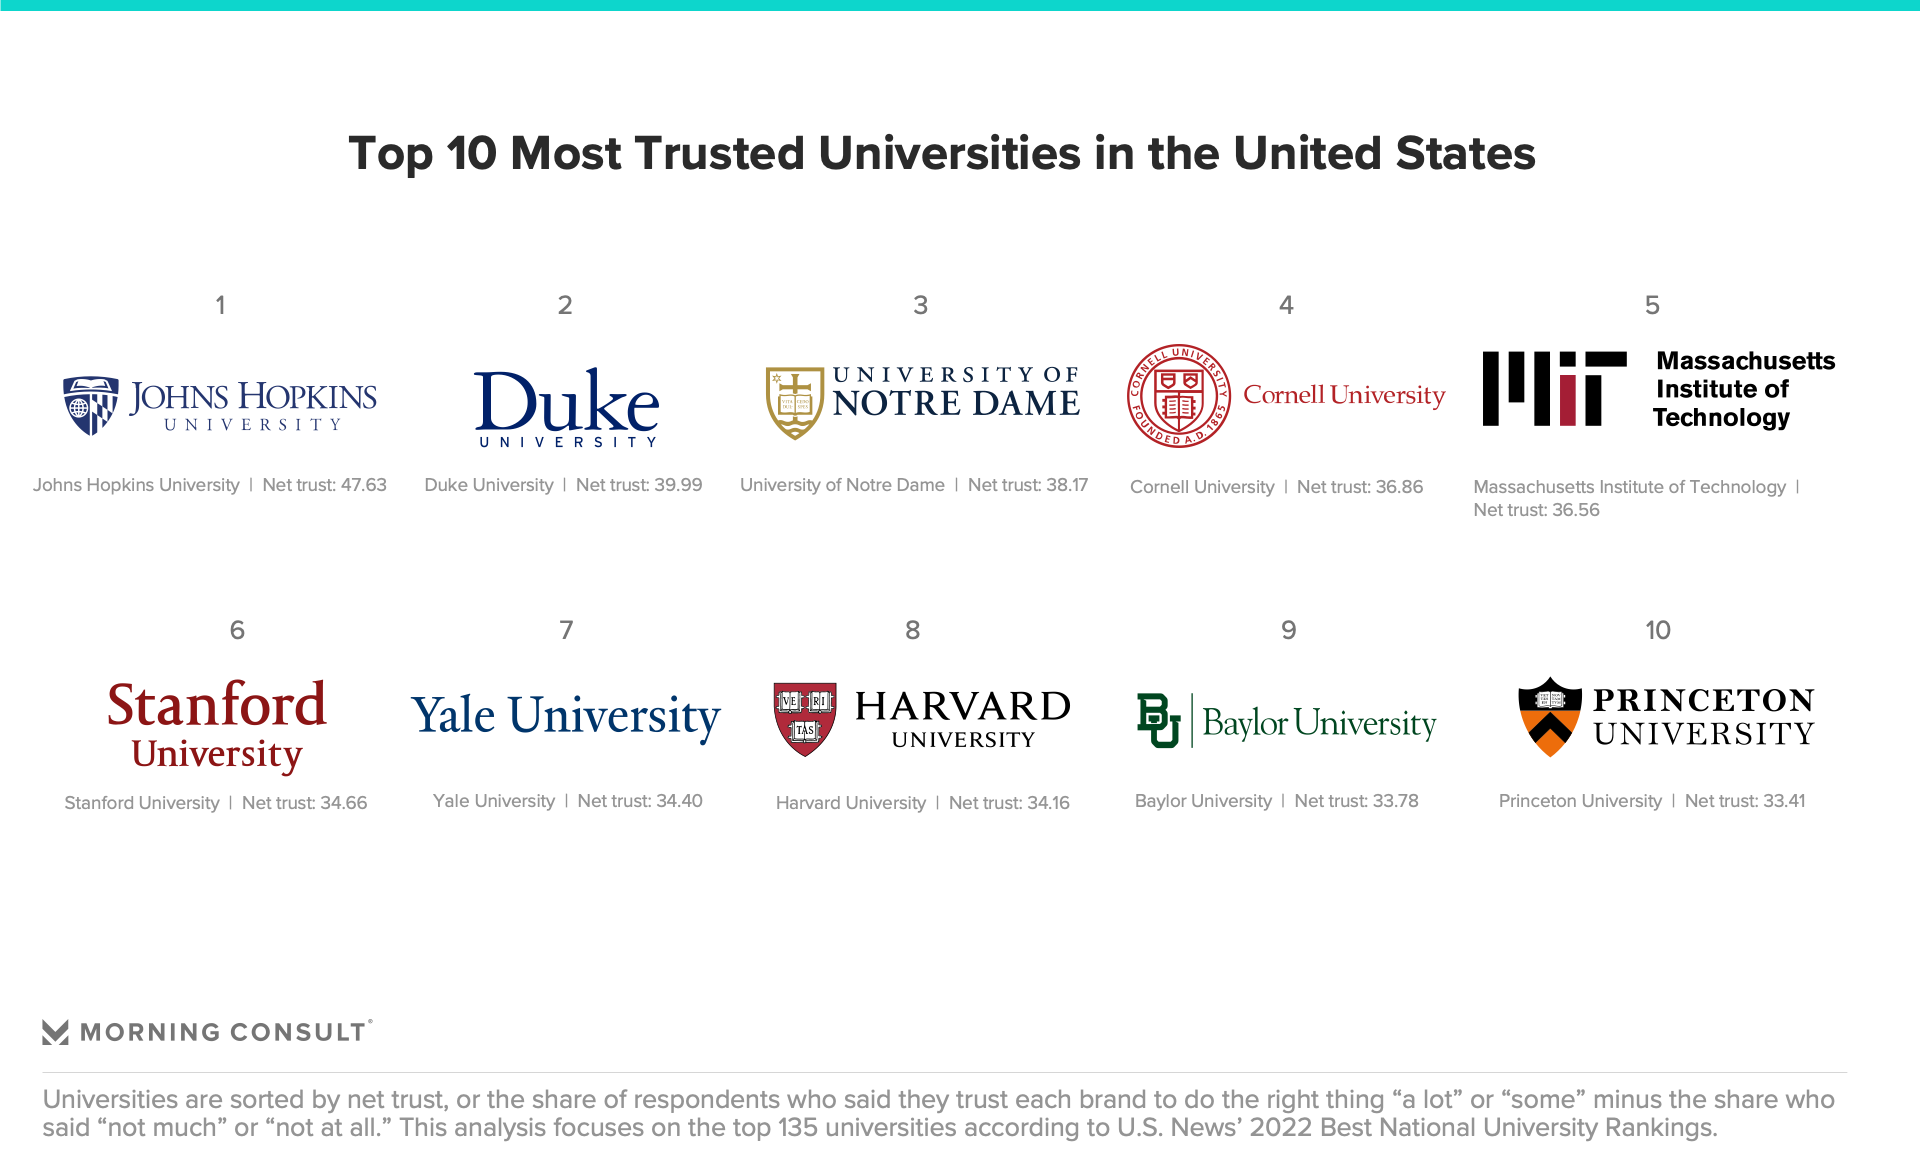 The top 10 Most Trusted Universities are: Johns Hopkins University, Duke University, University of Notre Dame, Cornell University, Massachusetts Institute of Technology, Stanford University, Yale University, Harvard University, Baylor University, Princeton University